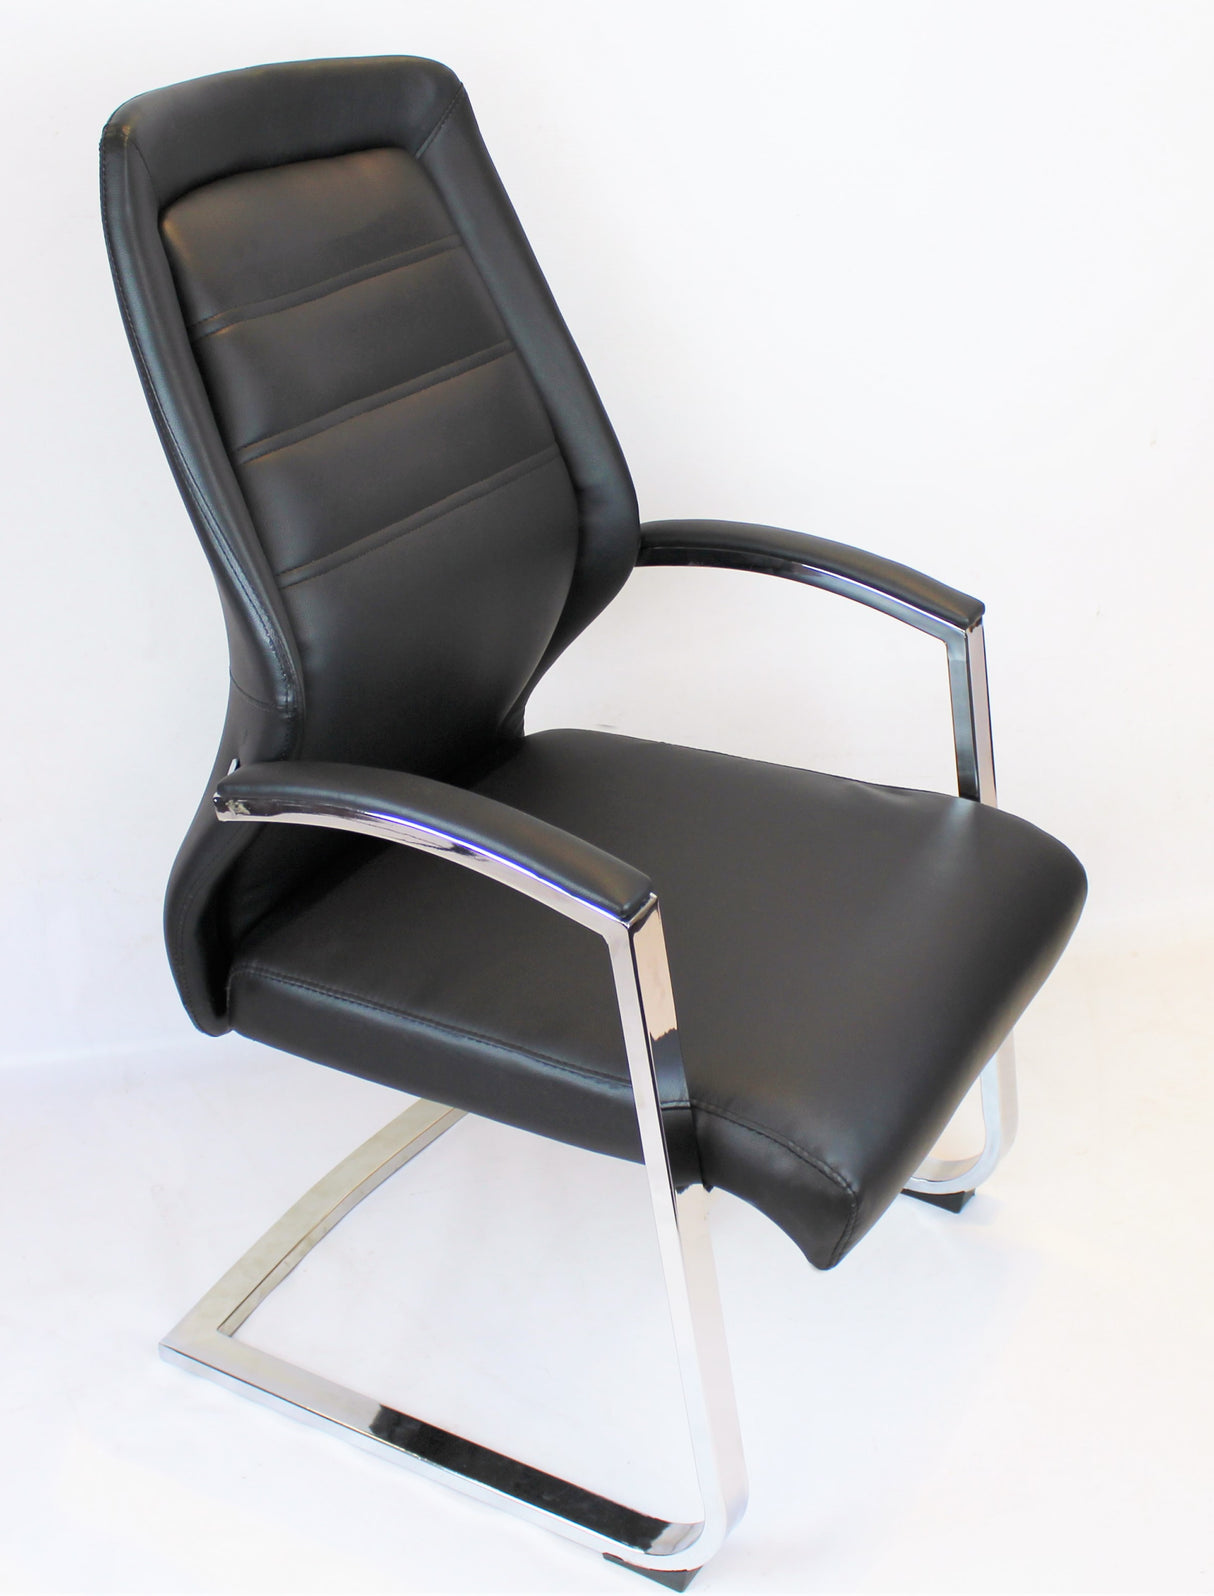 Modern Black Leather Meeting Chairs - DH-103-2